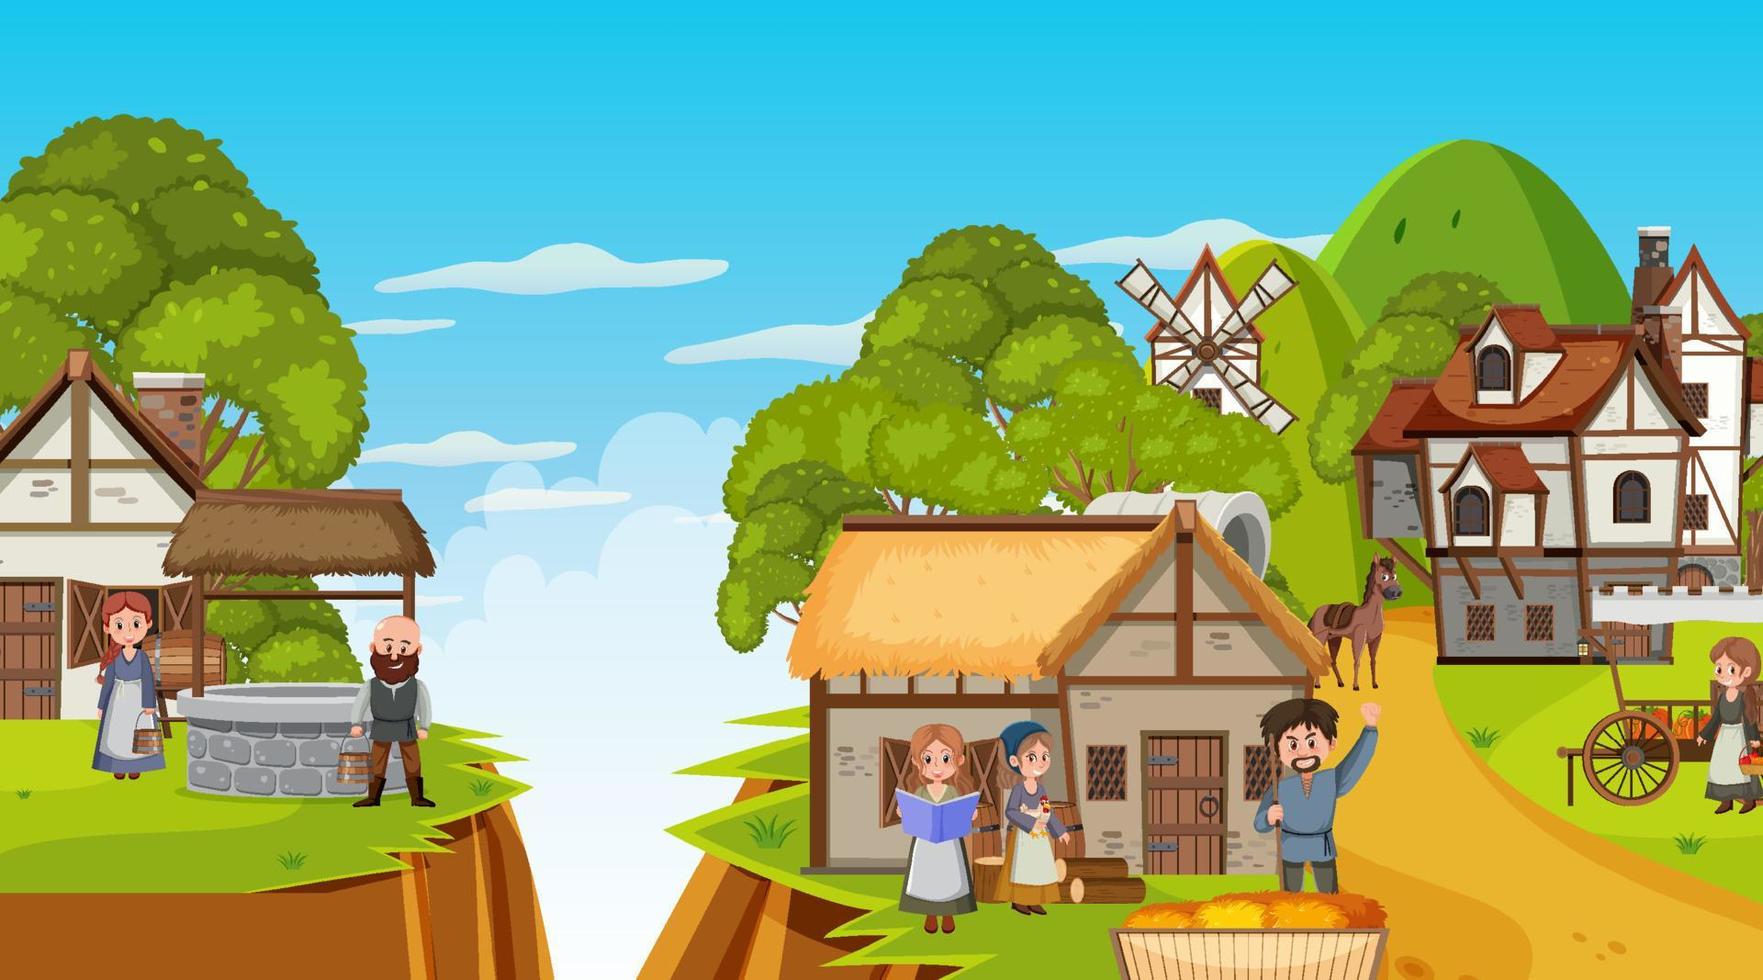 Medieval town scene with villagers vector